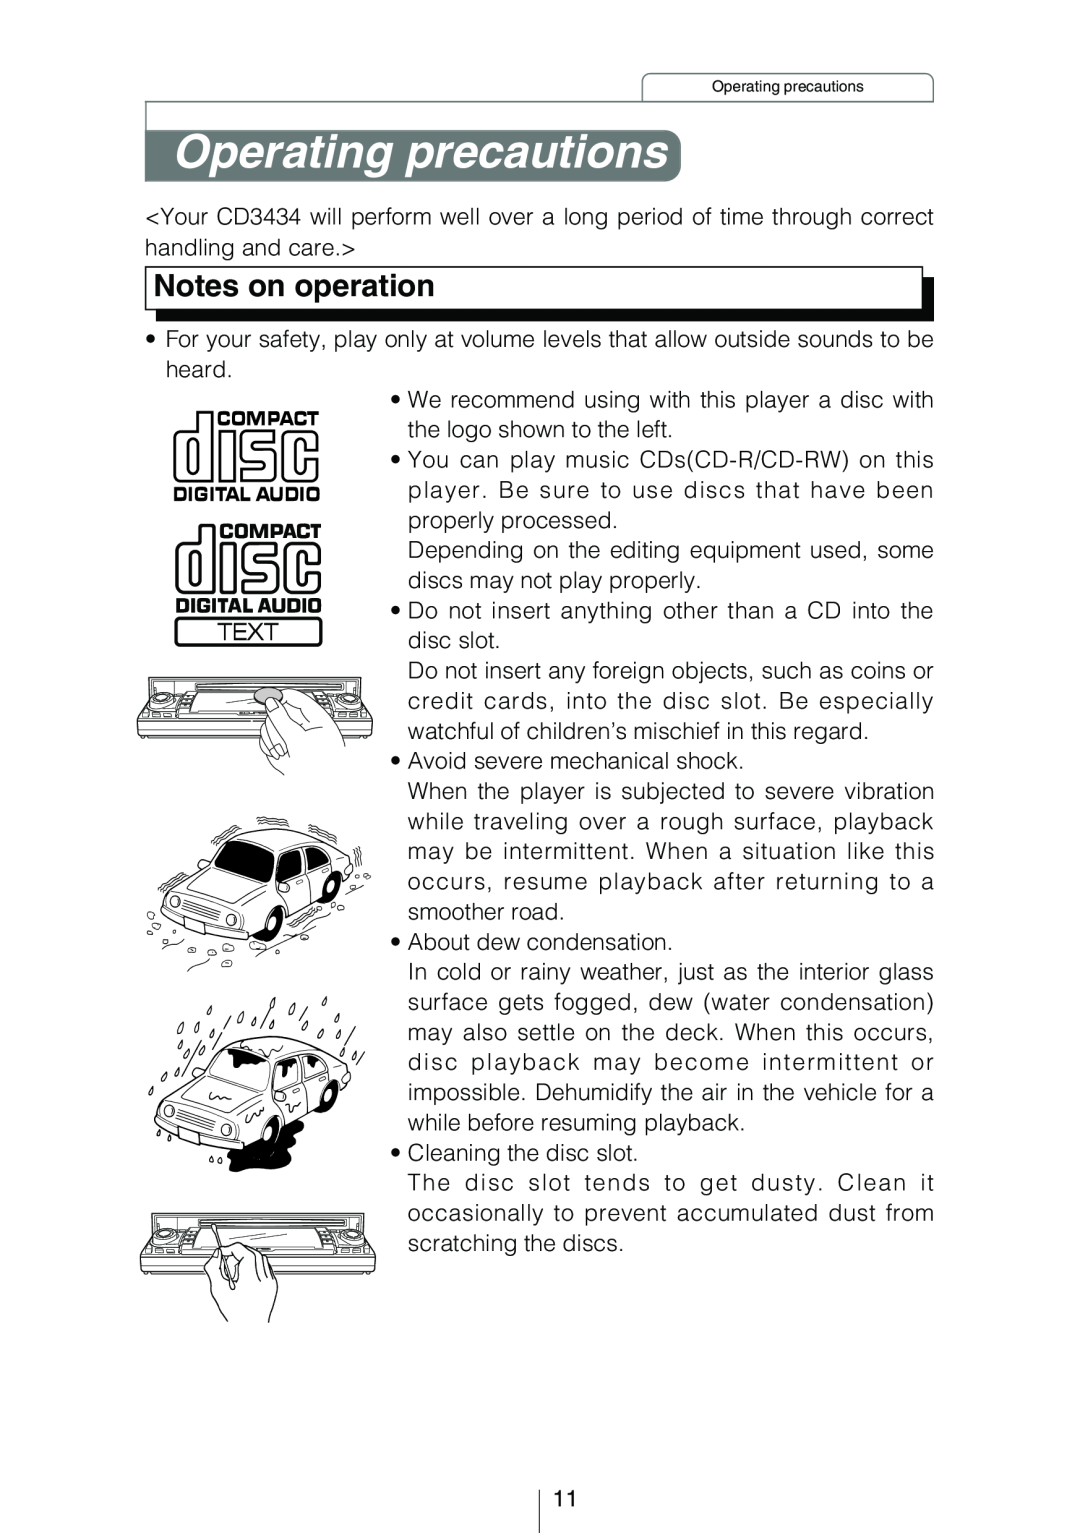 Eclipse - Fujitsu Ten CD3434 owner manual Operating precautions, Notes on operation 